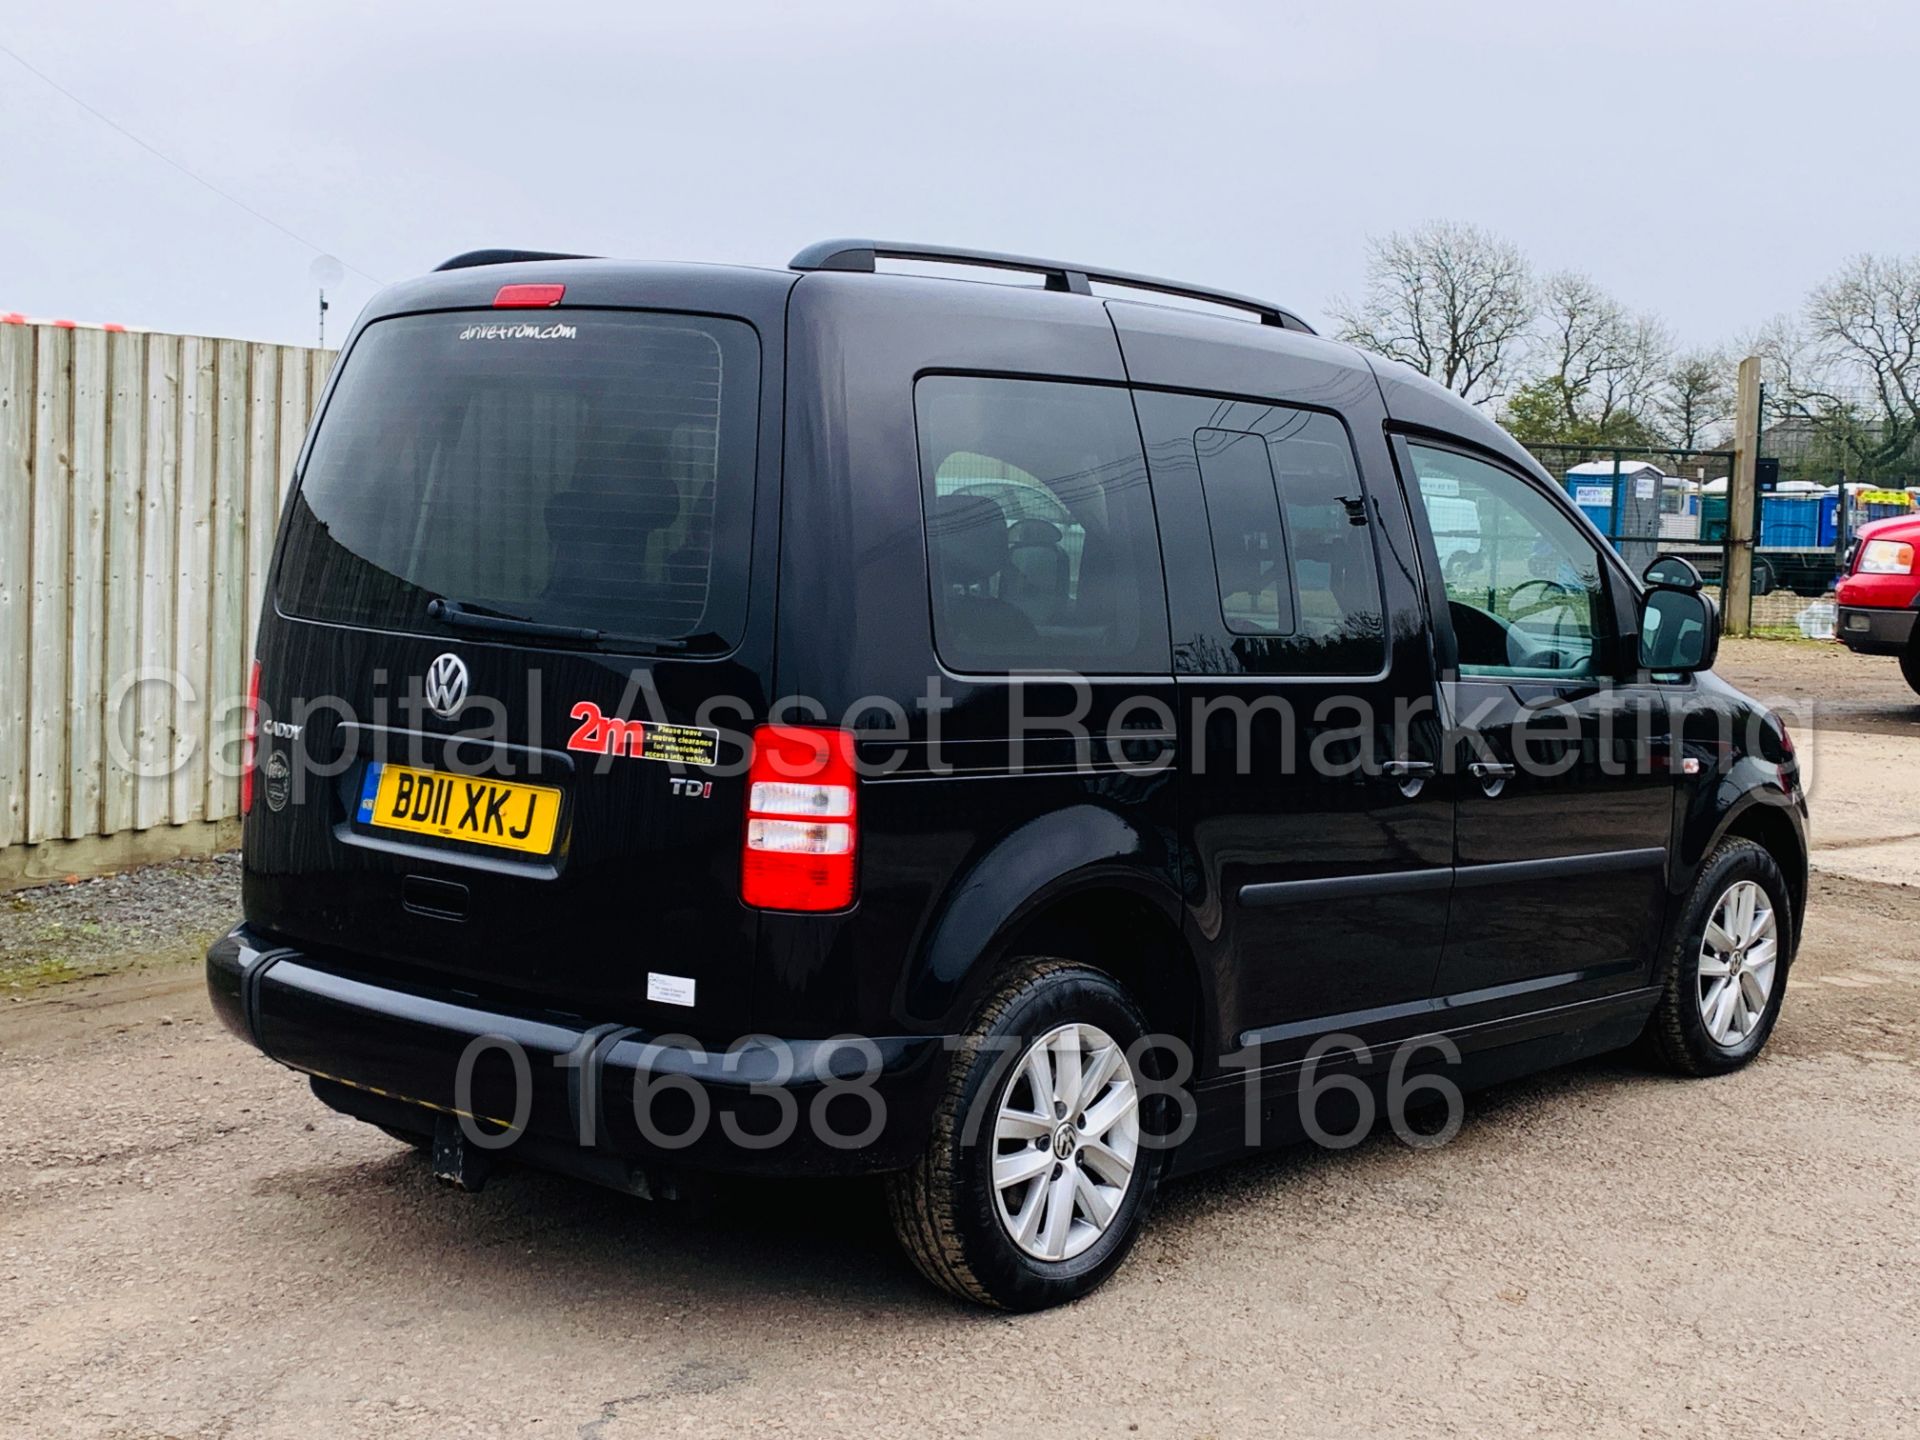 VOLKSWAGEN CADDY C20 *LIFE* DISABILITY ACCESS /WAV (2011) '1.6 TDI - AUTO' *A/C* (35,000 MILES ONLY) - Image 8 of 41